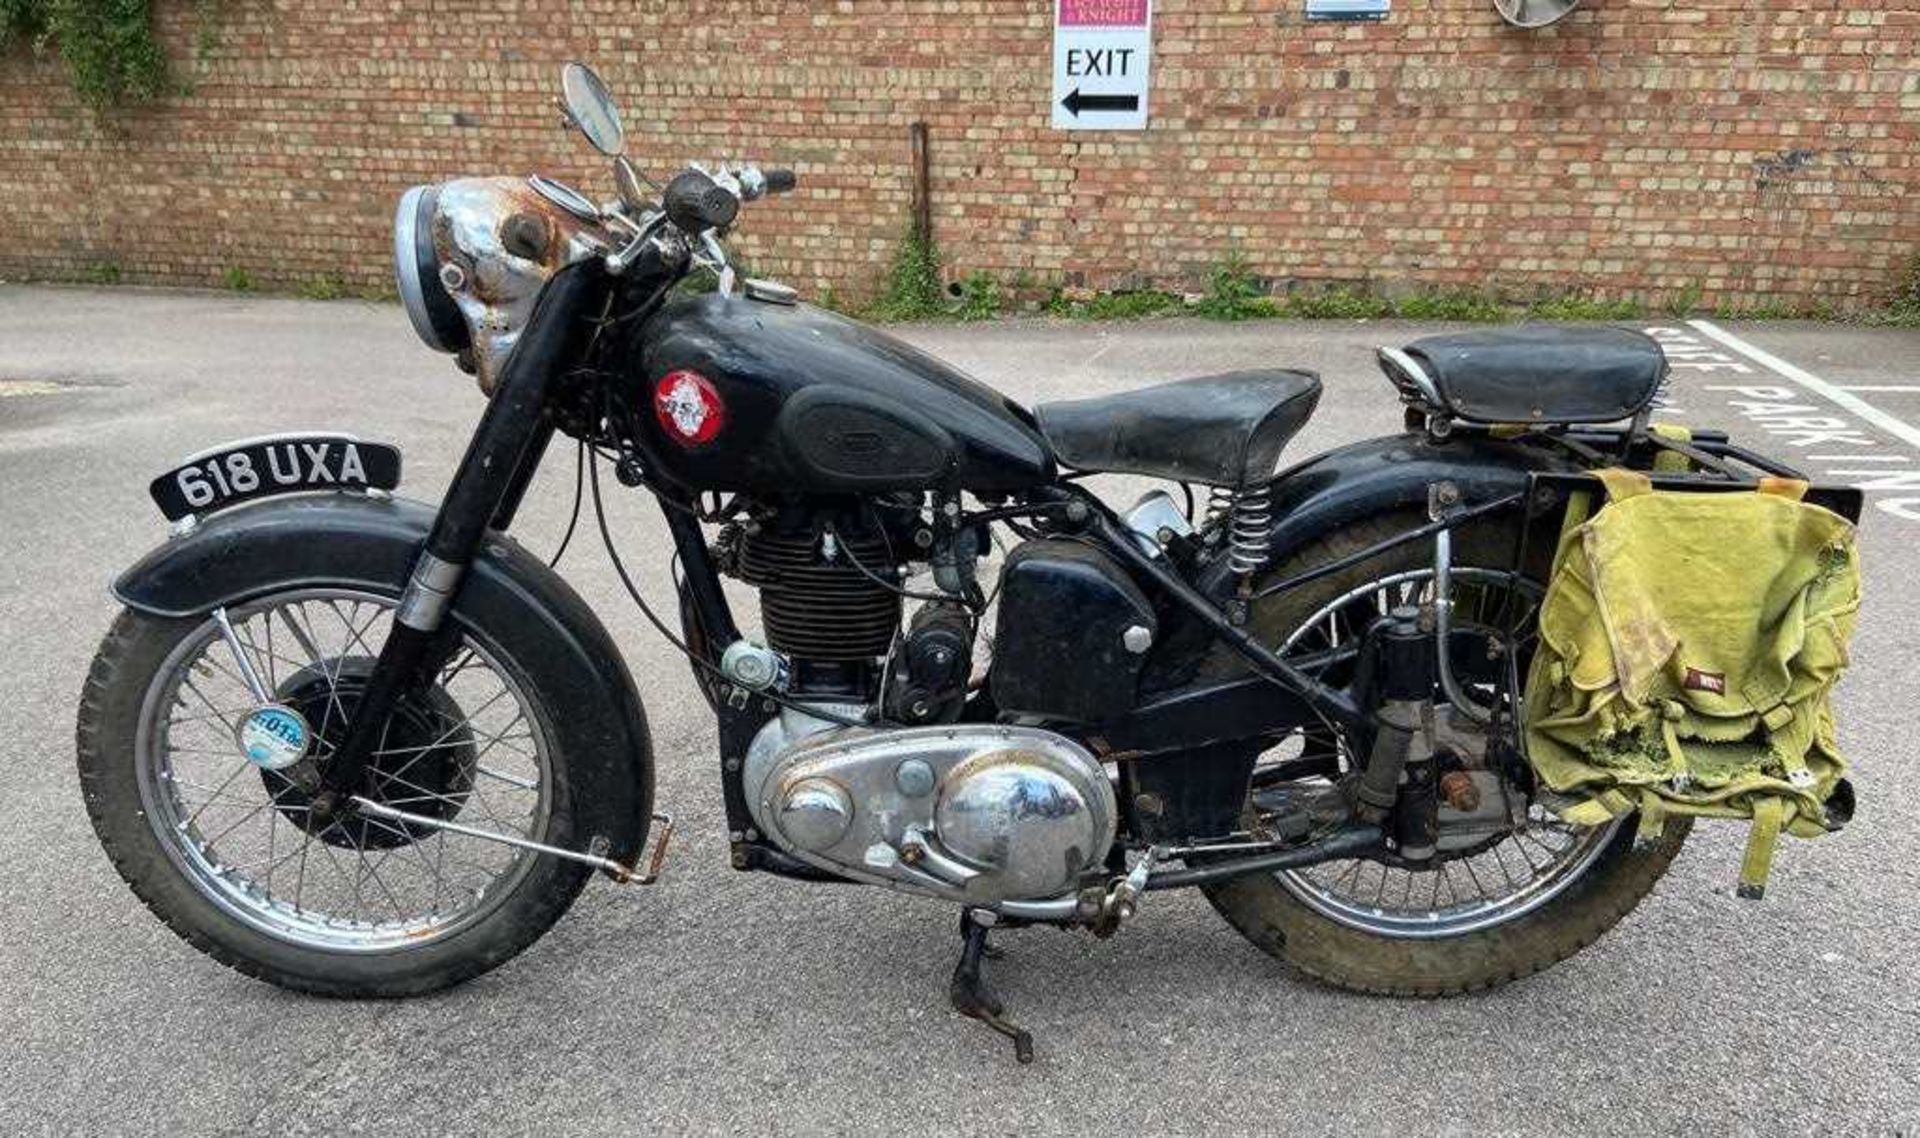 1954 BSA M33 Motorcycle 500cc Non-transferrable age commensurate number plate verified by Roy - Image 3 of 13